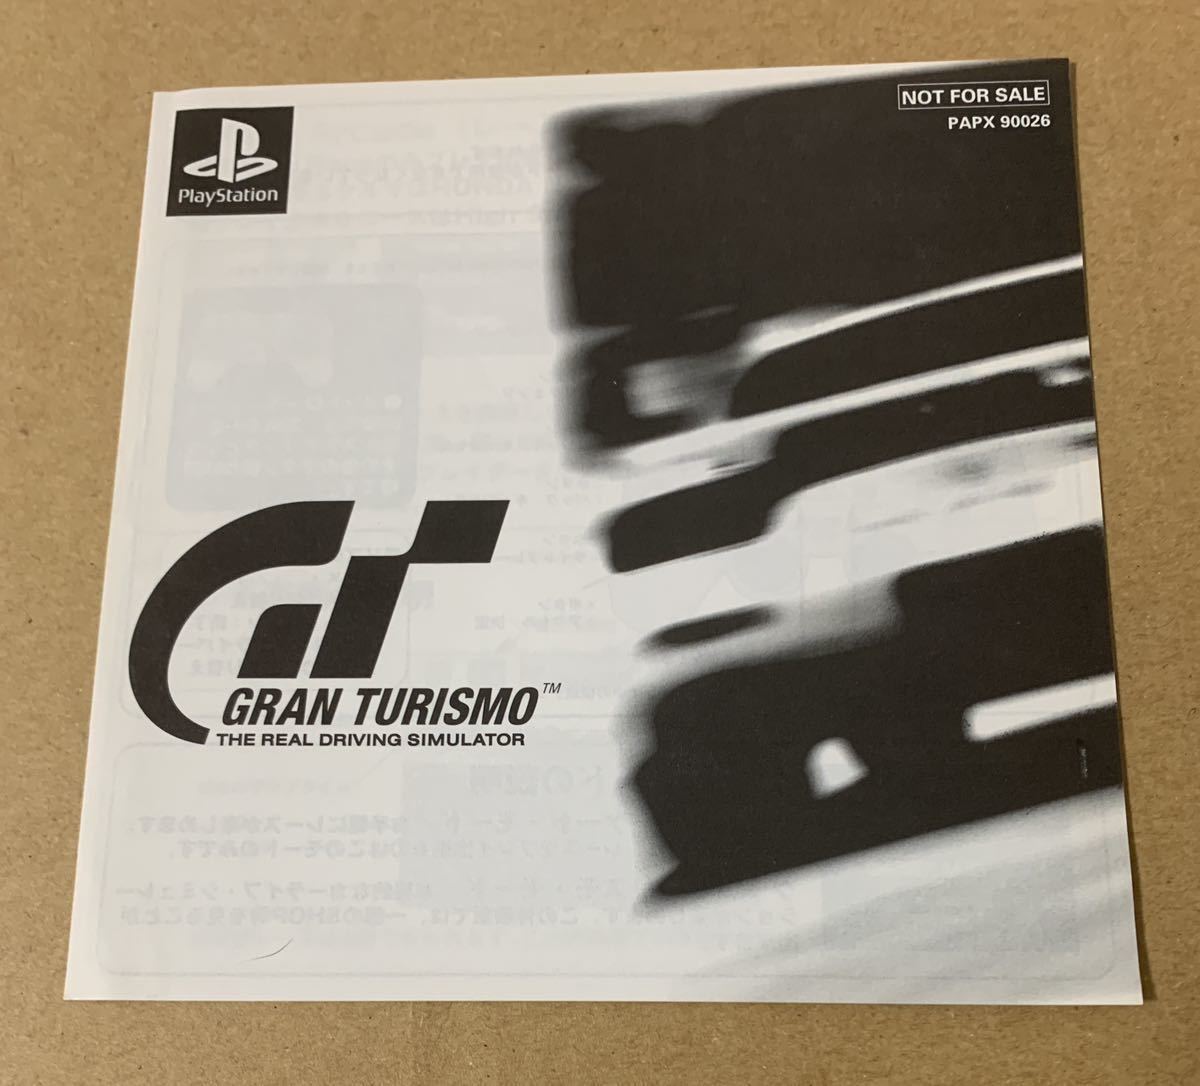 PS GRAN TURISMO 体験版 非売品 デモ demo not for sale PAPX 90026 グランツーリスモ GT_画像3